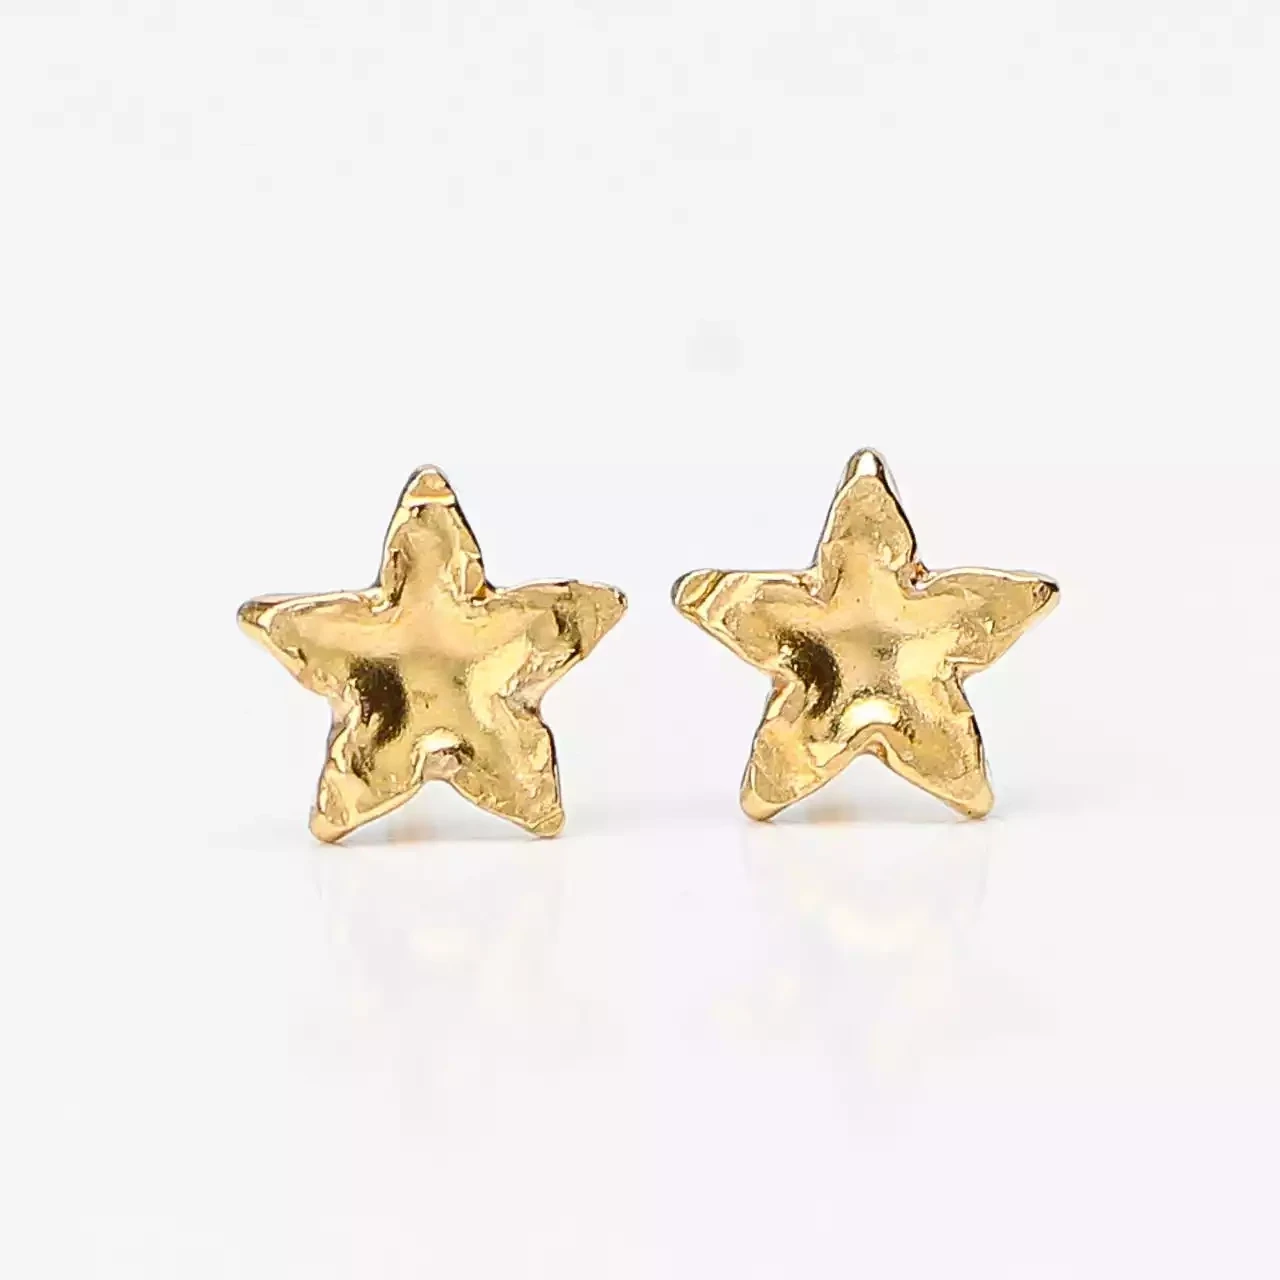 Star Gold Stud Earrings - Tiny by Silverfish